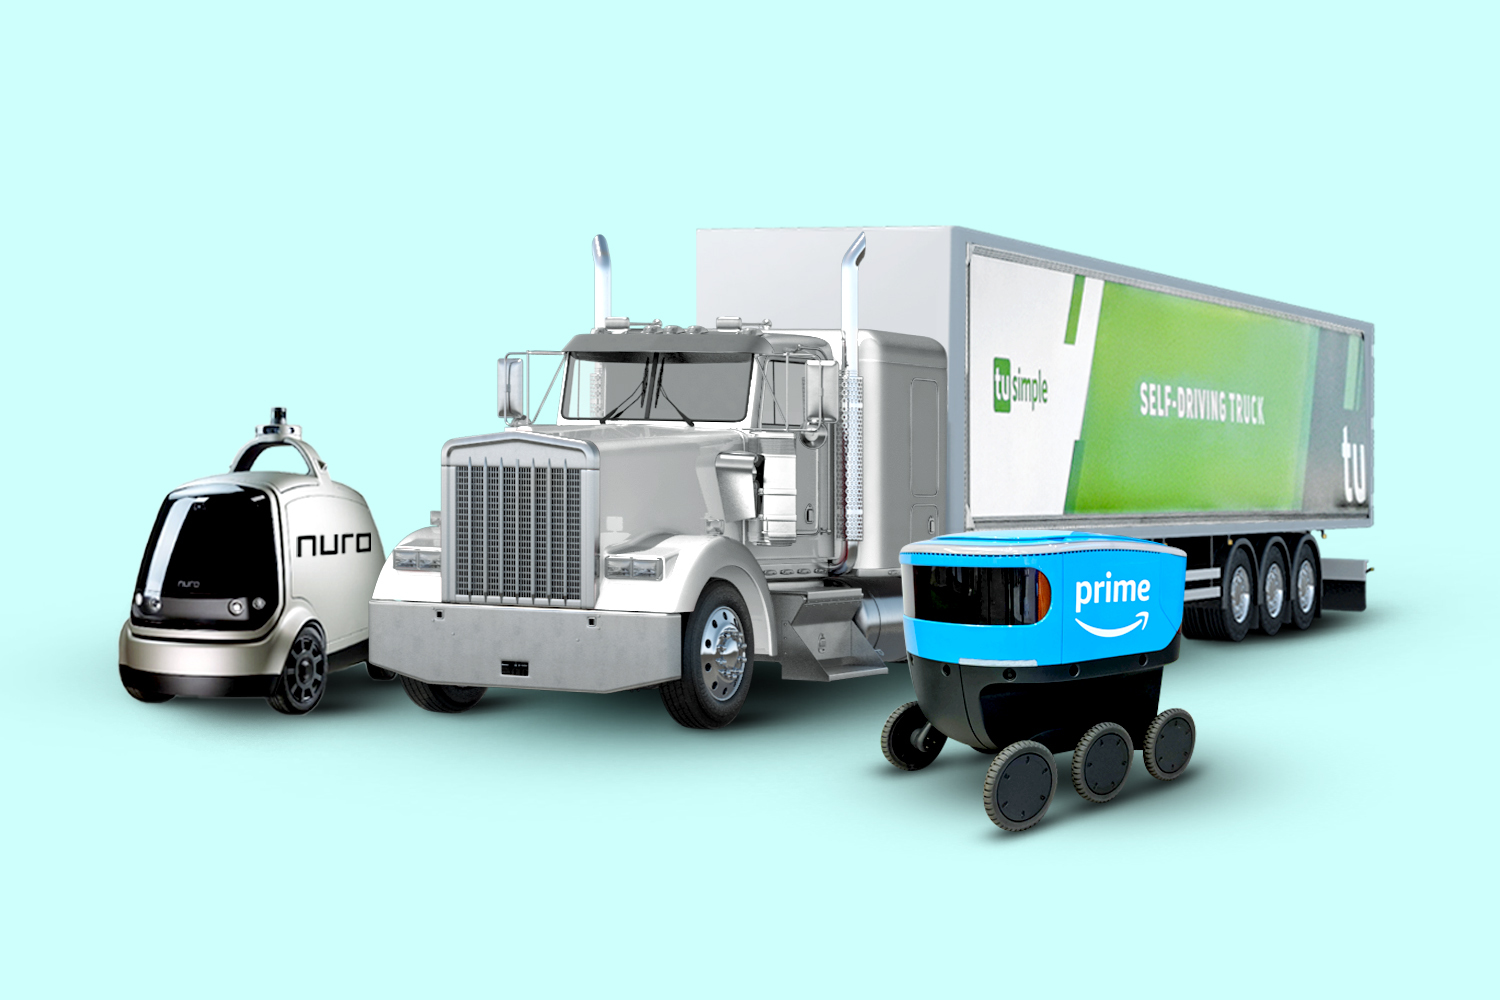 An artist's rendering of a Nuro robotic vehicle, TuSimple self-driving truck, and Amazon Scout delivery robot, side by side